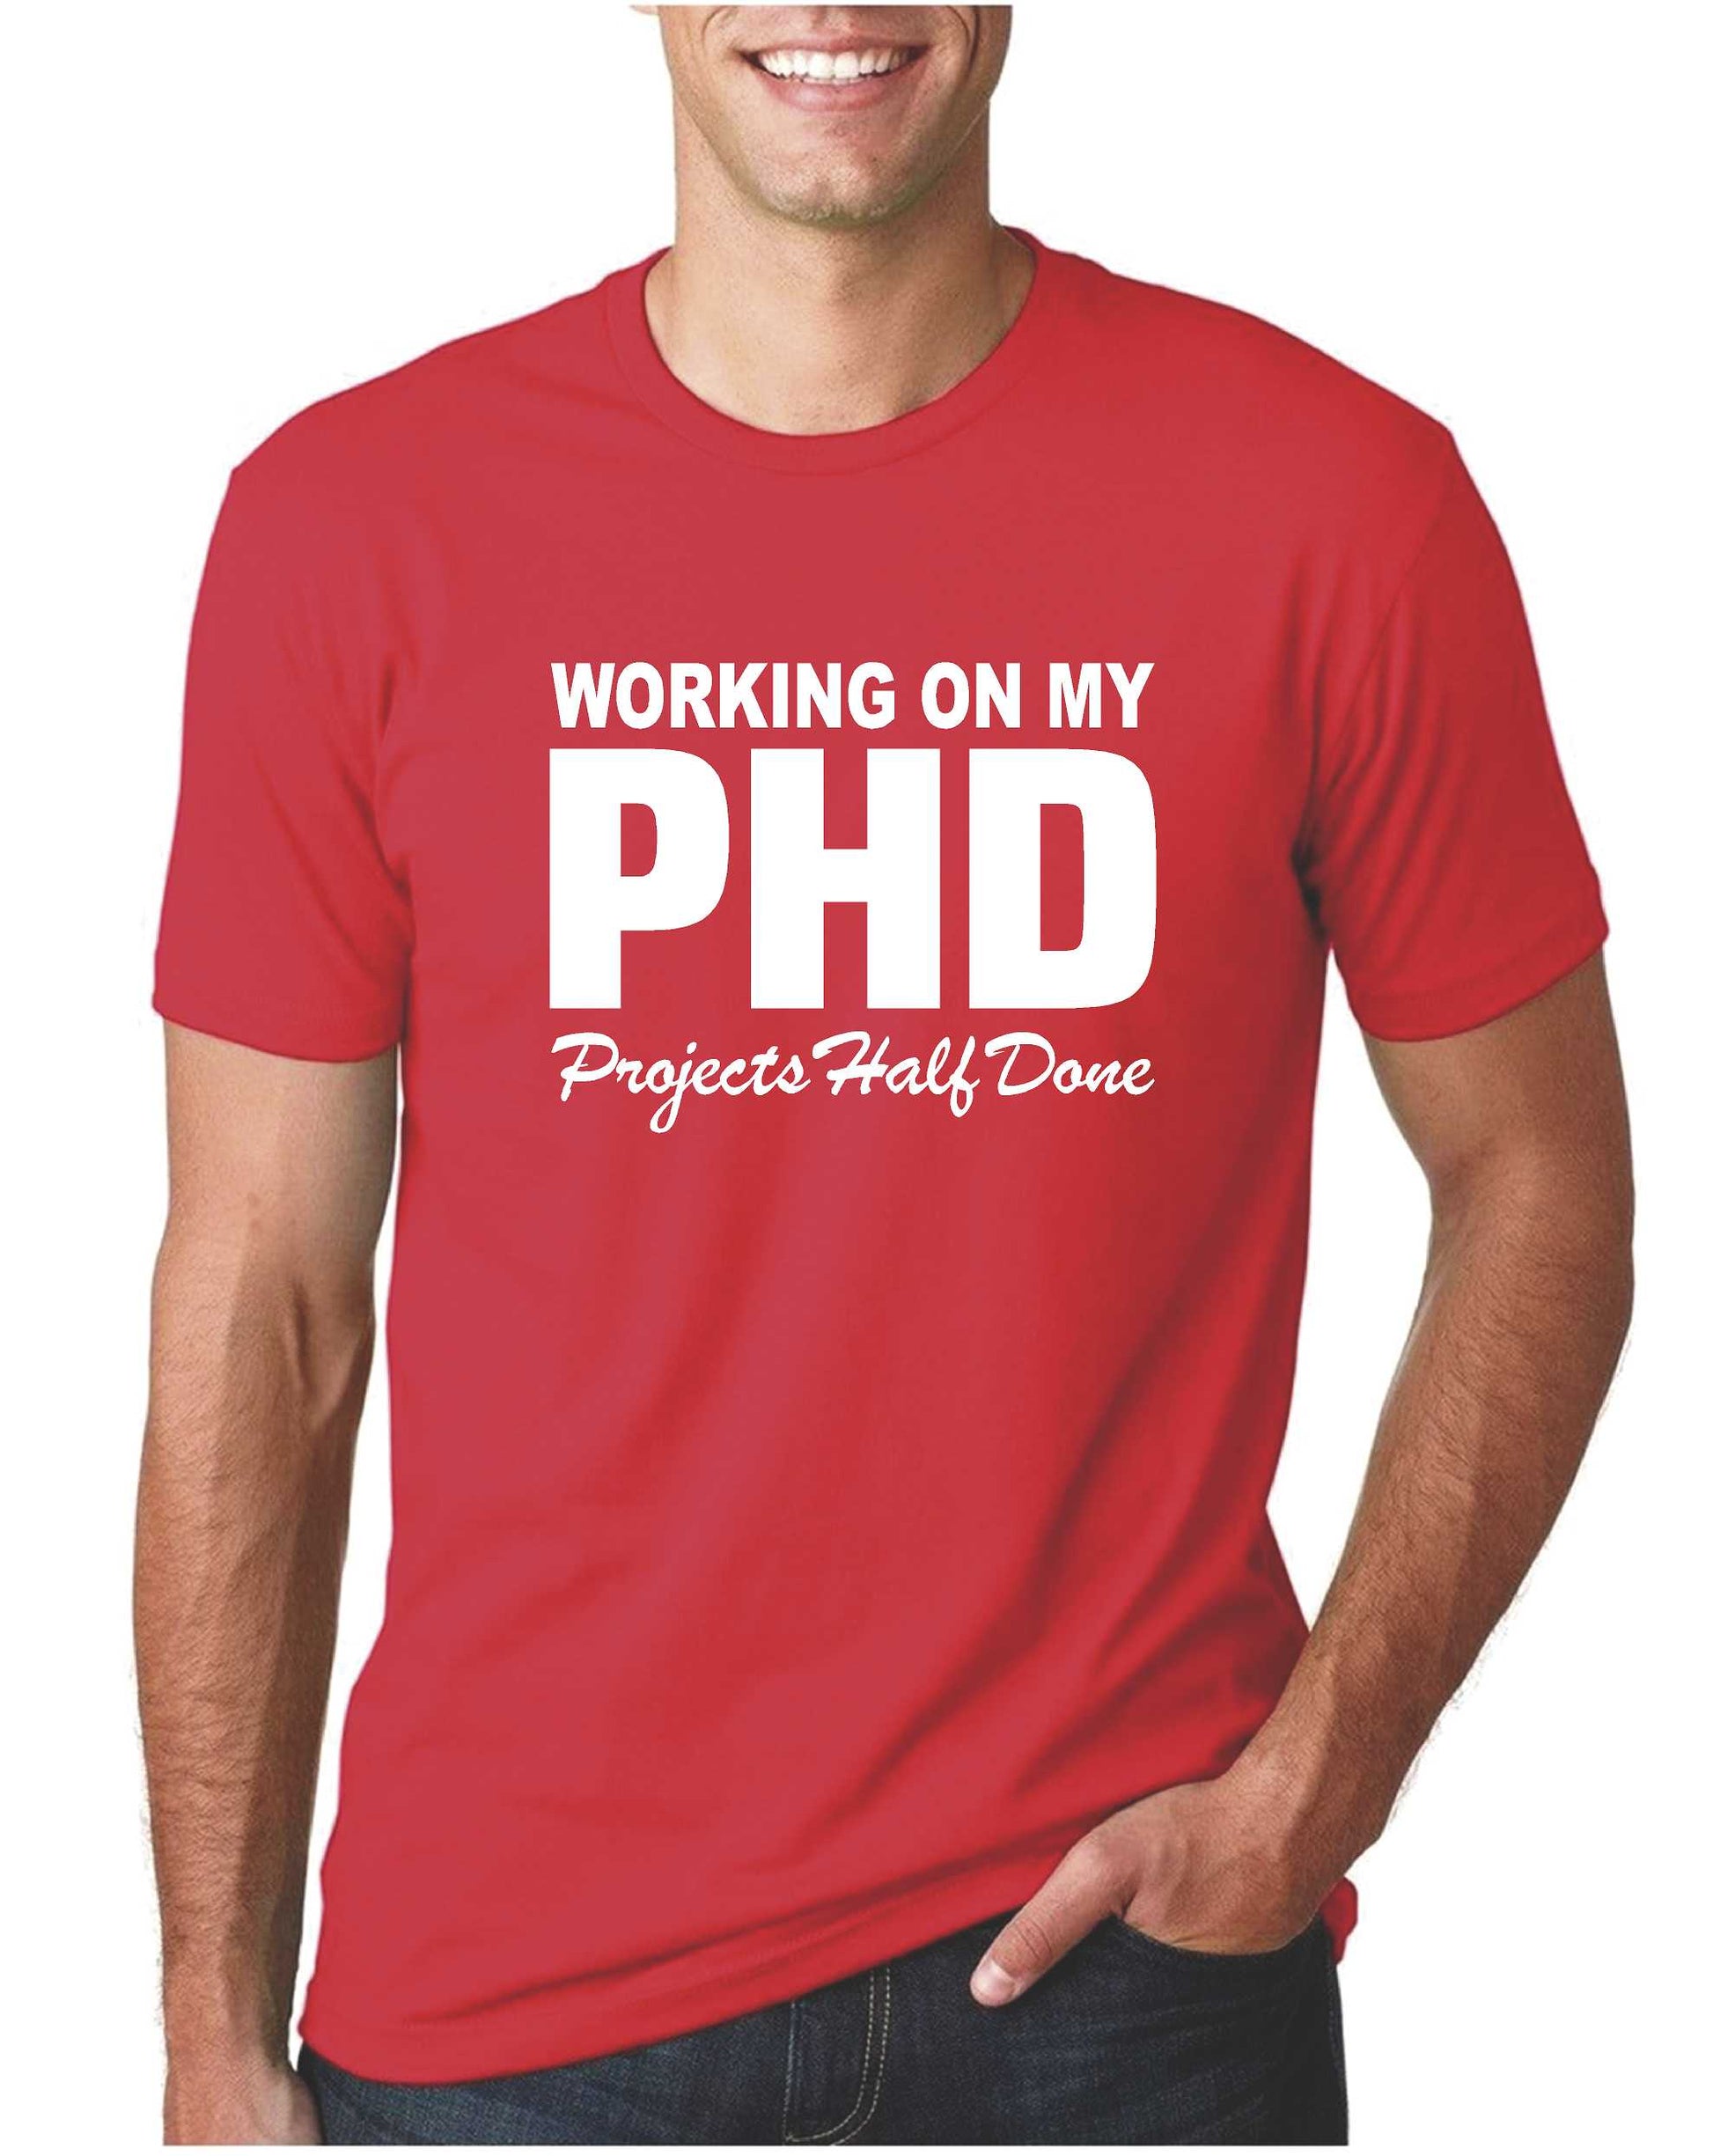 Mens Working on PHD Projects Half Done Funny T-Shirt – Our T Shirt